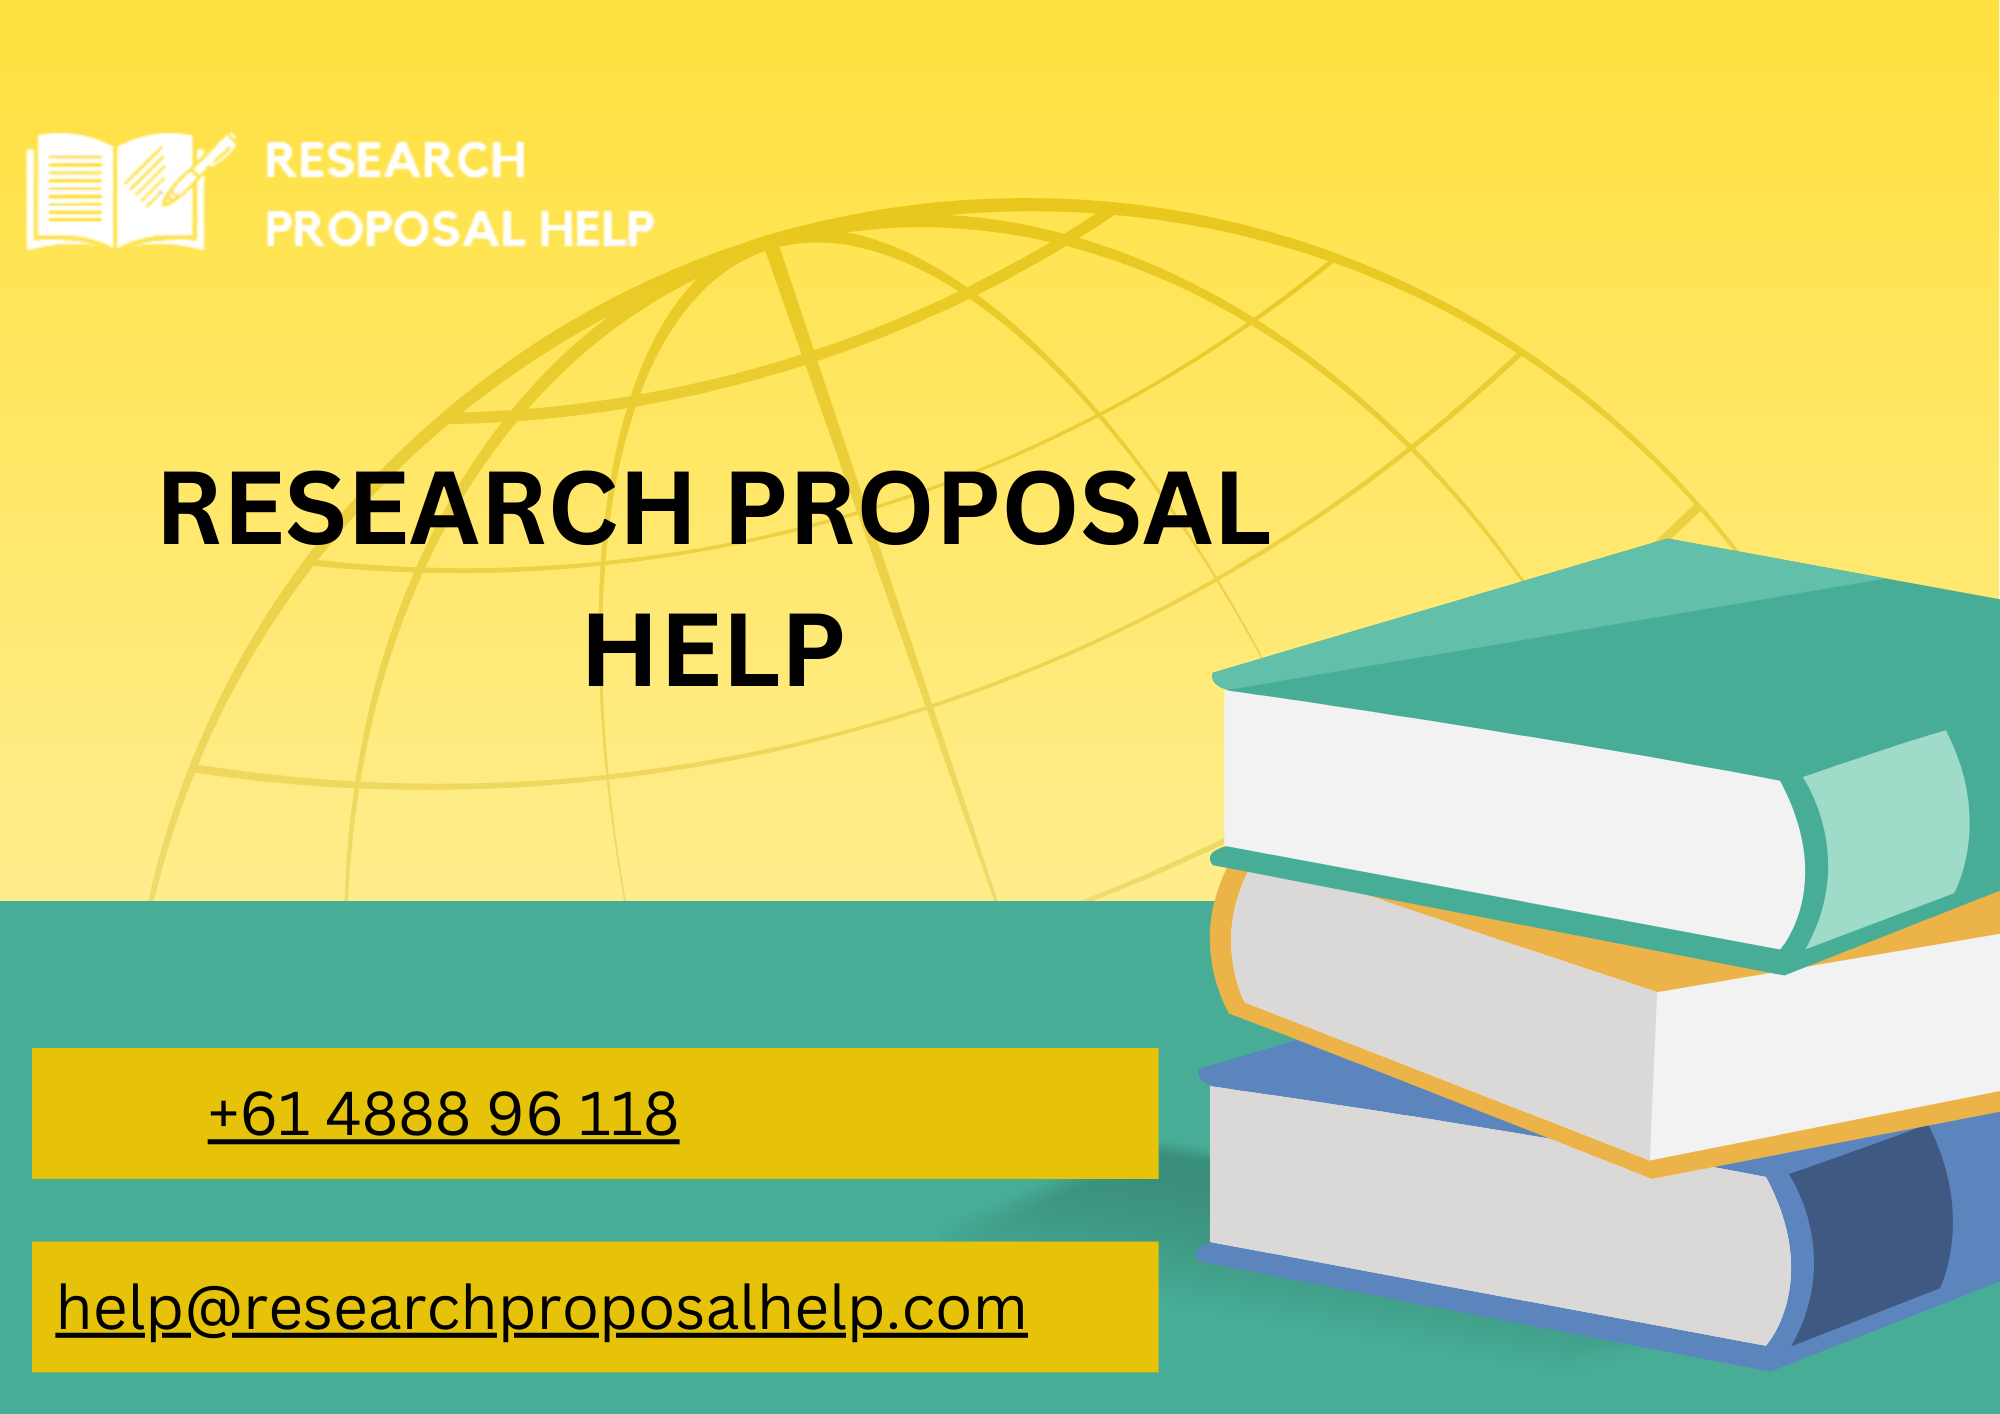 From Idea to Impact: Building a Strong Foundation with Your Research Proposal